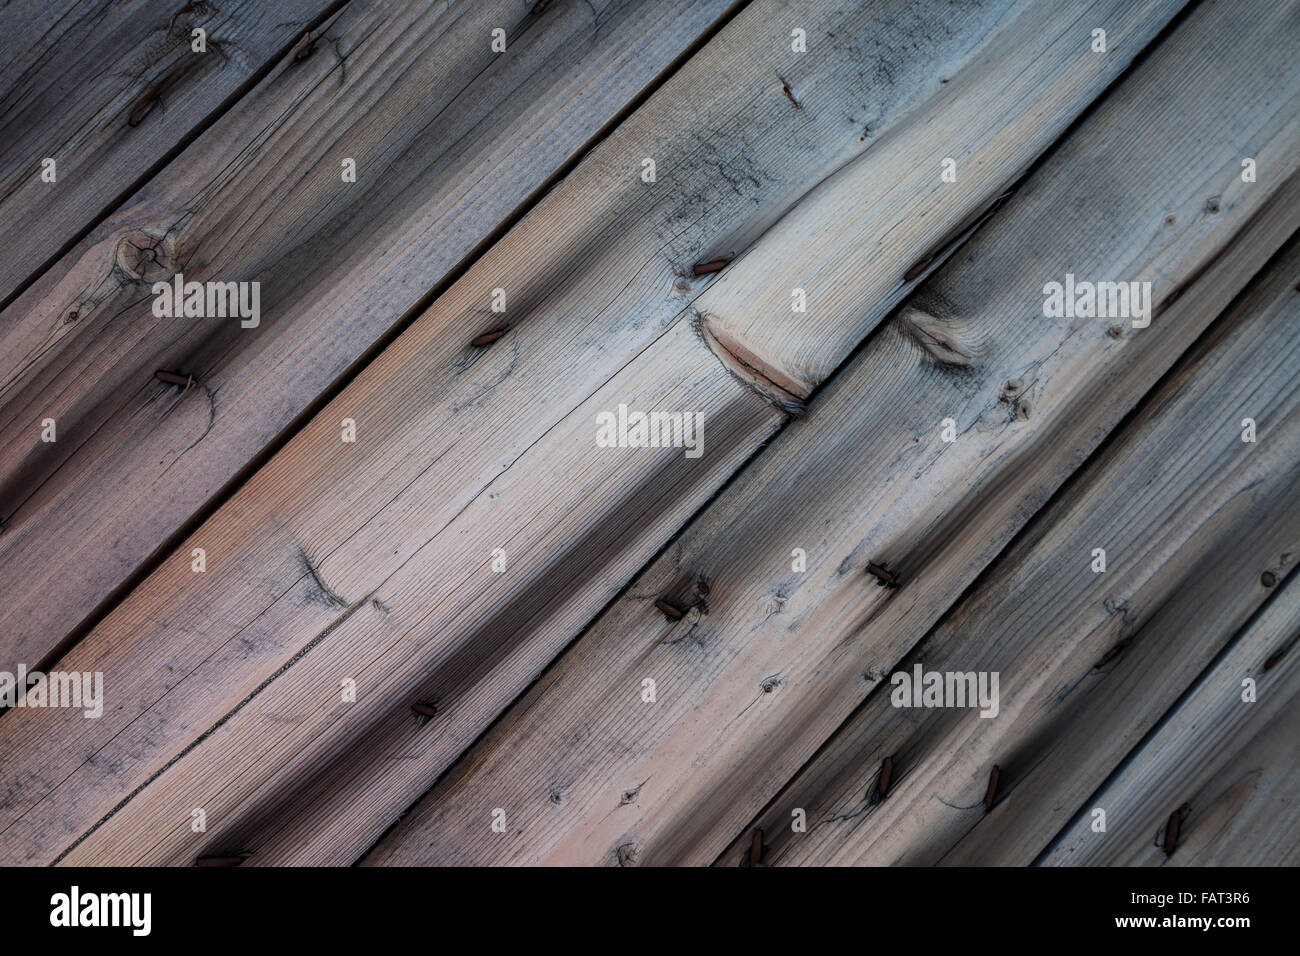 Wood gray brown tone texture background diagonal grunge old panels wooden board rustic plank Stock Photo